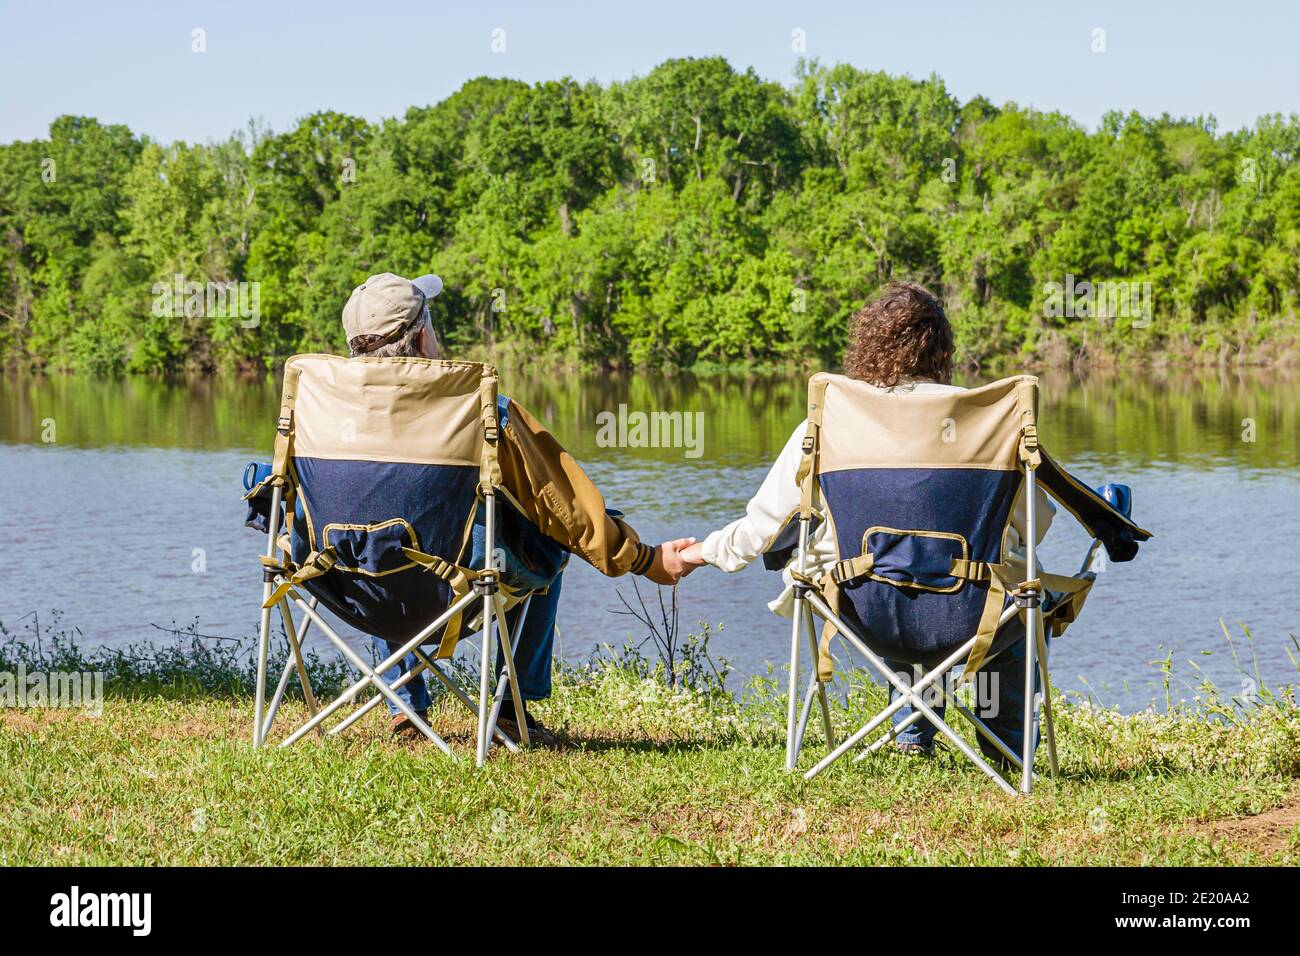 Alabama Monroeville Isaac Creek Campground,Claiborne Lake Alabama River Lakes water scenery,man woman female couple relaxing holding hands, Stock Photo